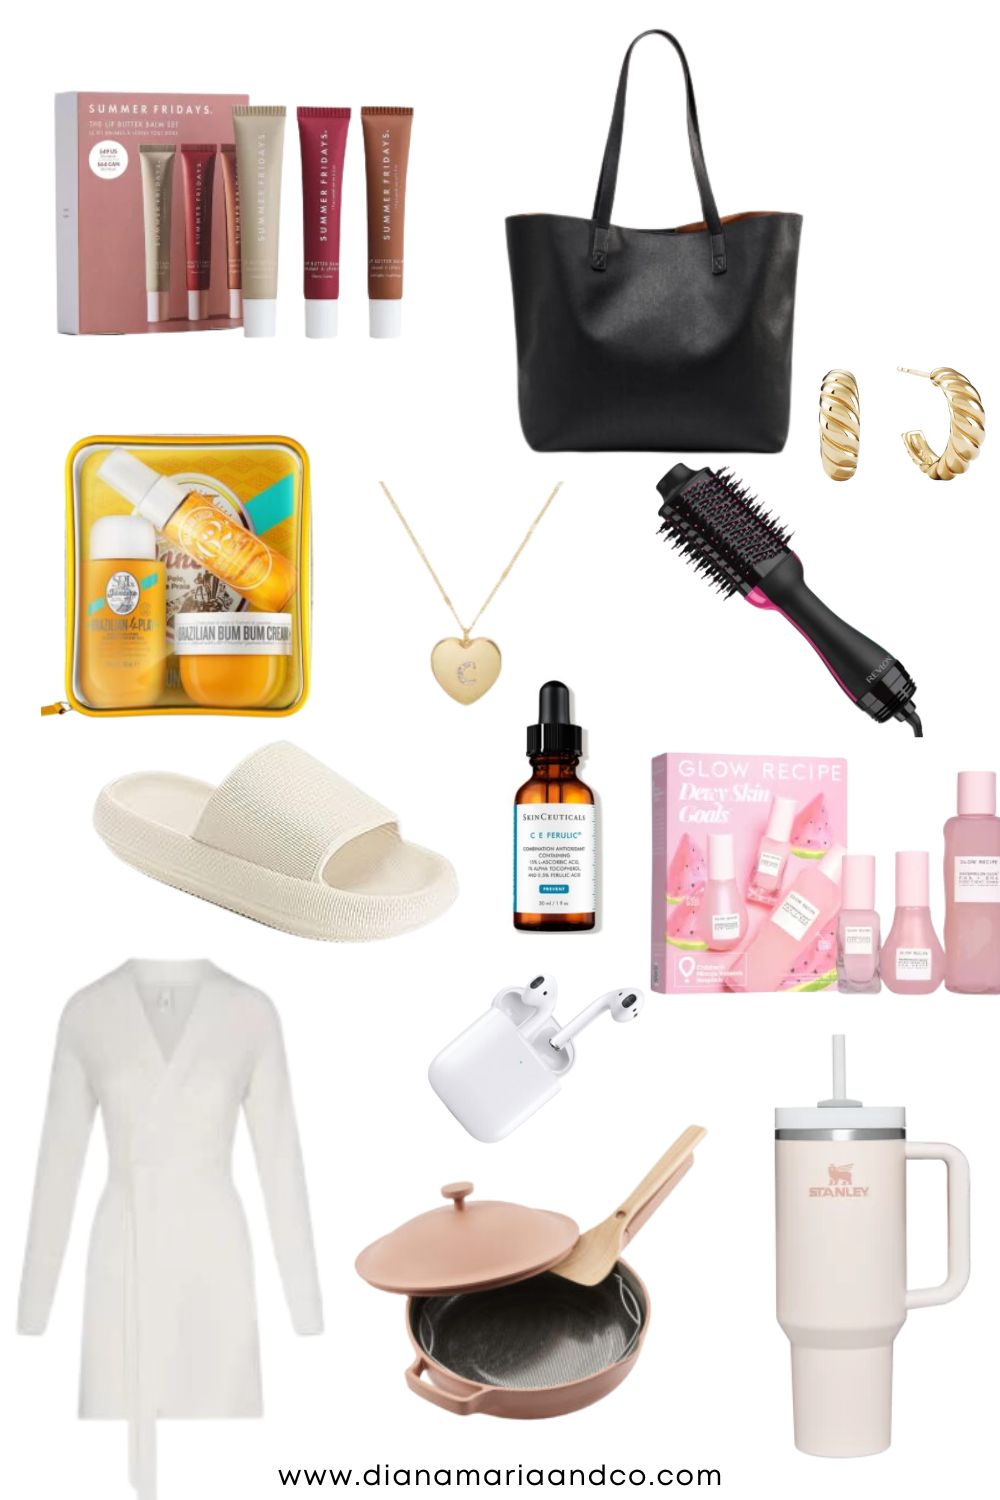 The Absolute Best Christmas Gifts For Mom She'll Totally Love - Diana Maria  & Co